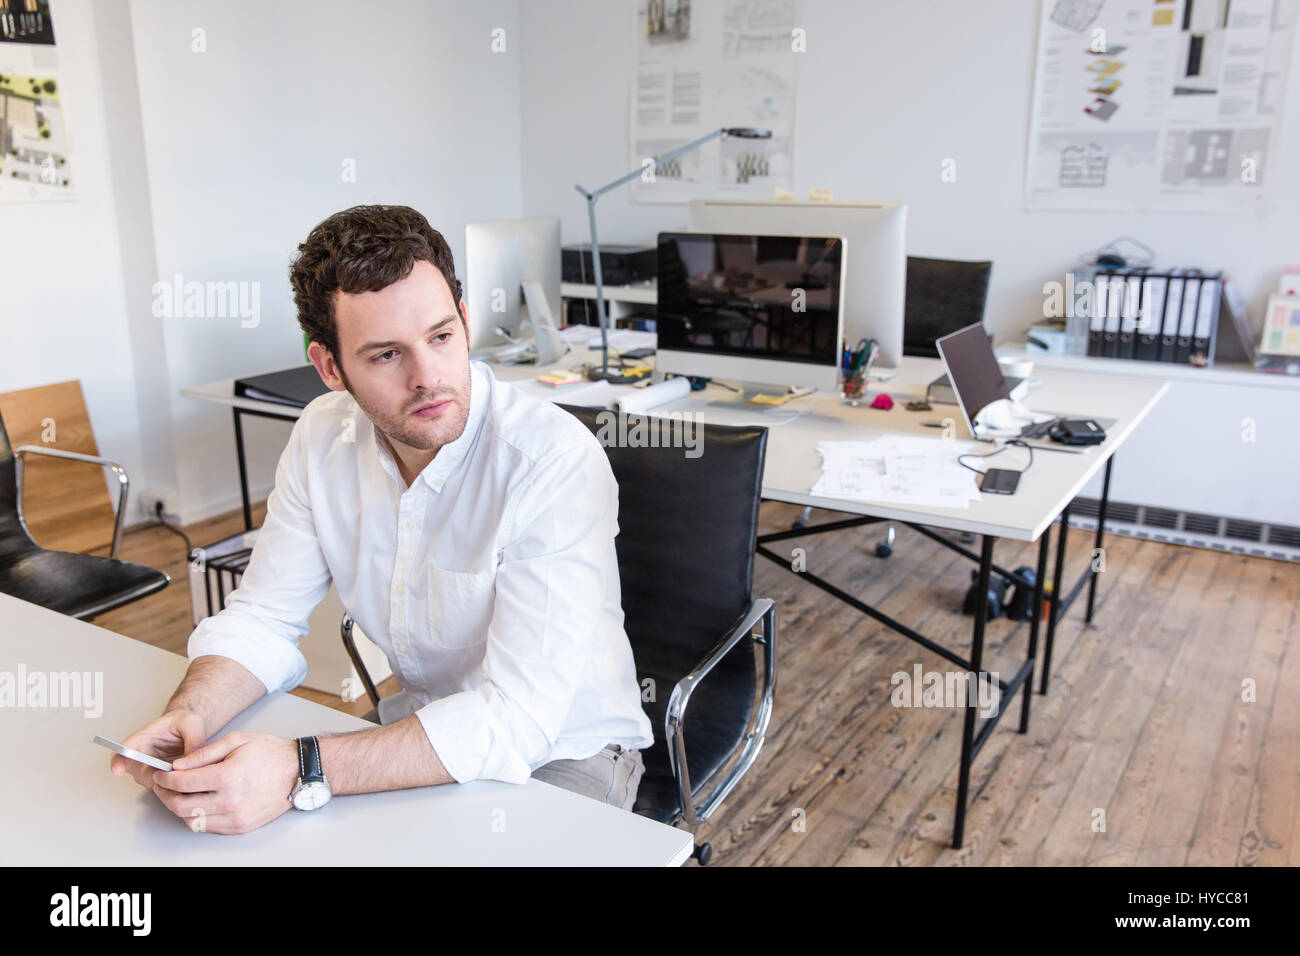 Mid adult man sitting in office at desk holding smartphone looking away Stock Photo